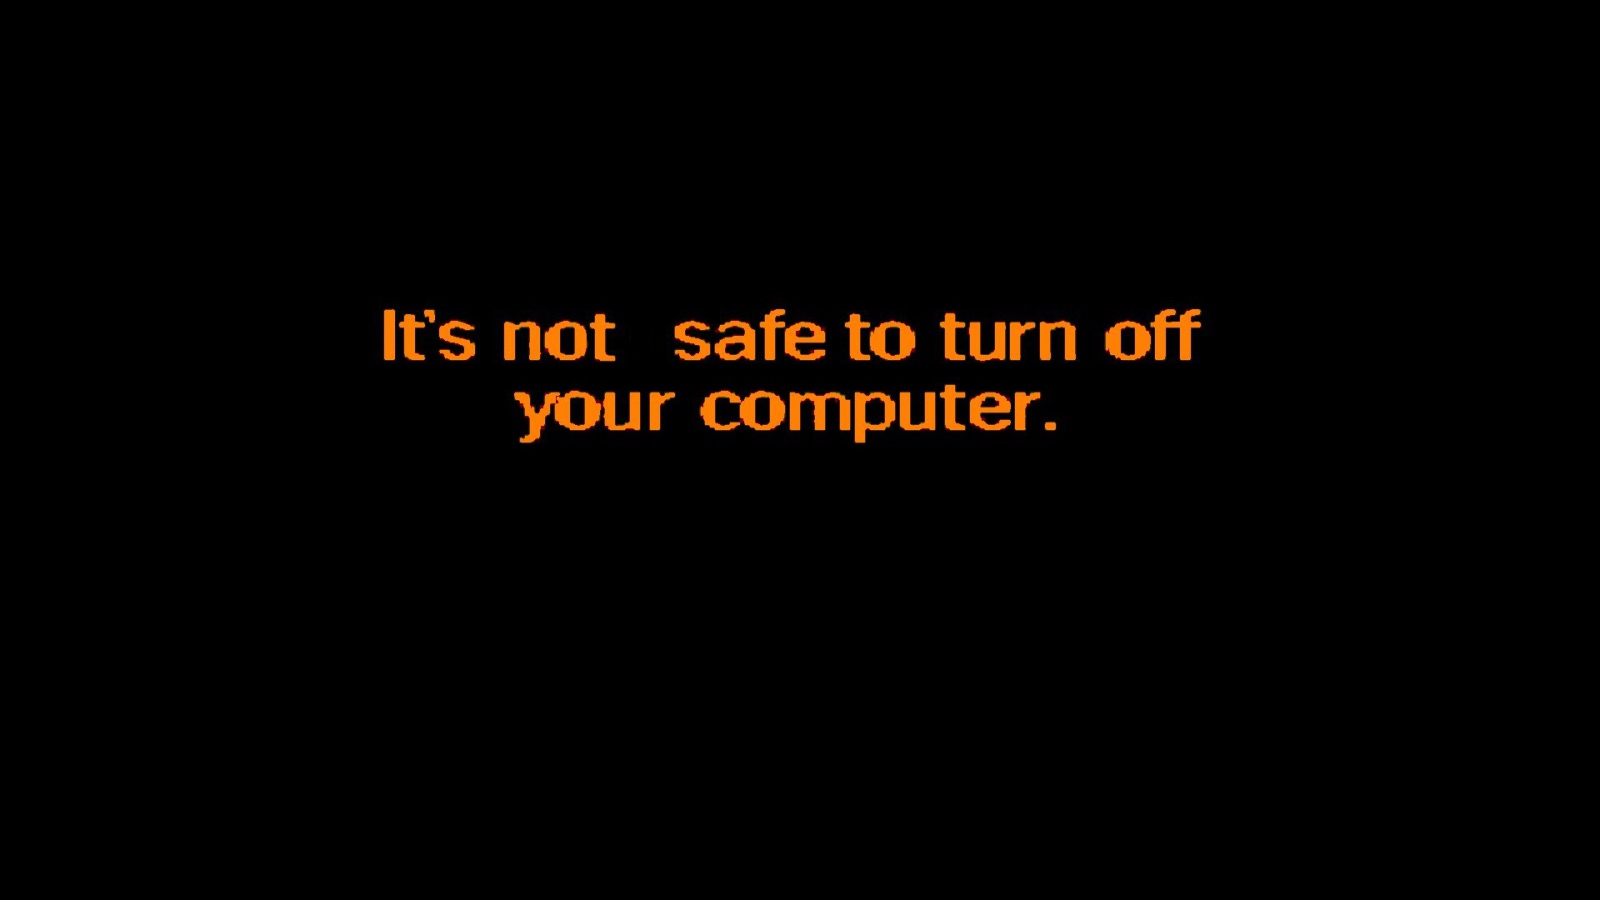 Do not shut down your computer safely